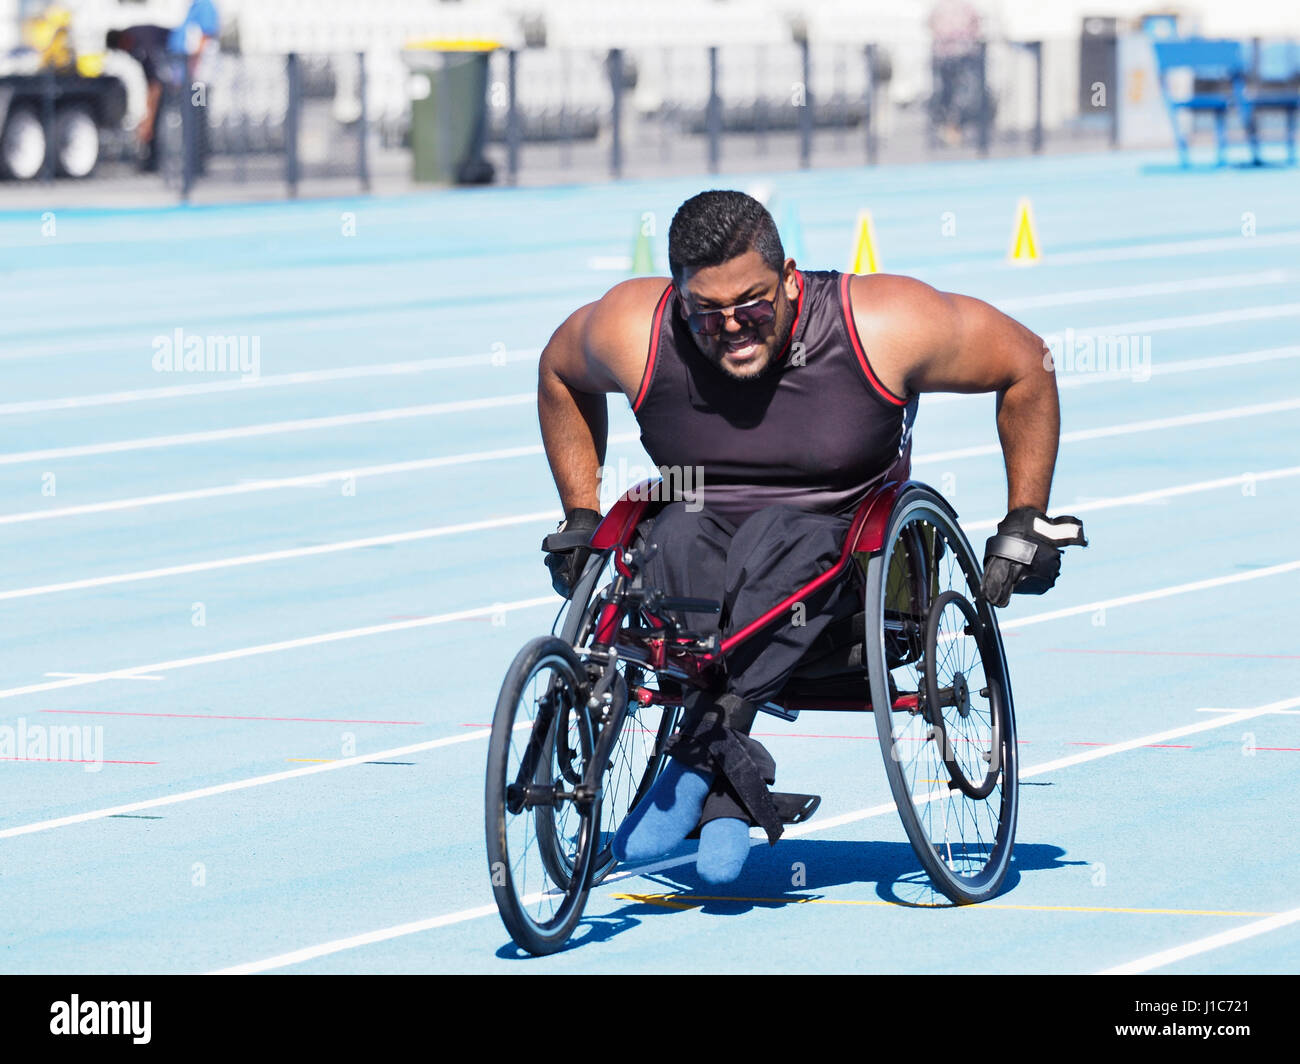 Middle Eastern man racing in wheelchair on track Stock Photo - Alamy